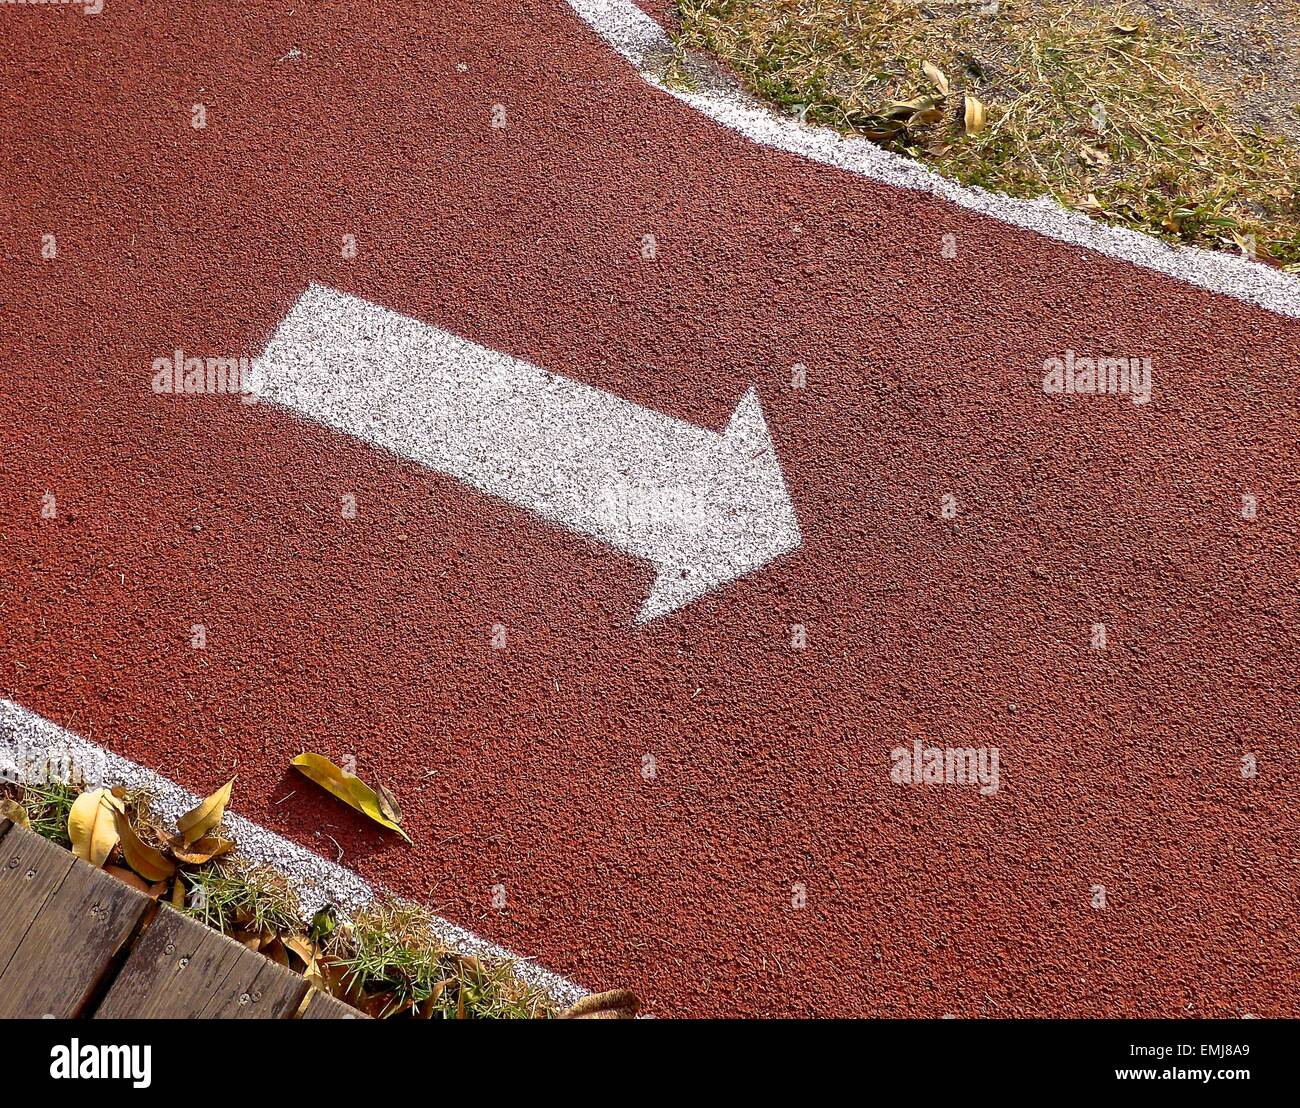 The running track closeup at a playground Stock Photo